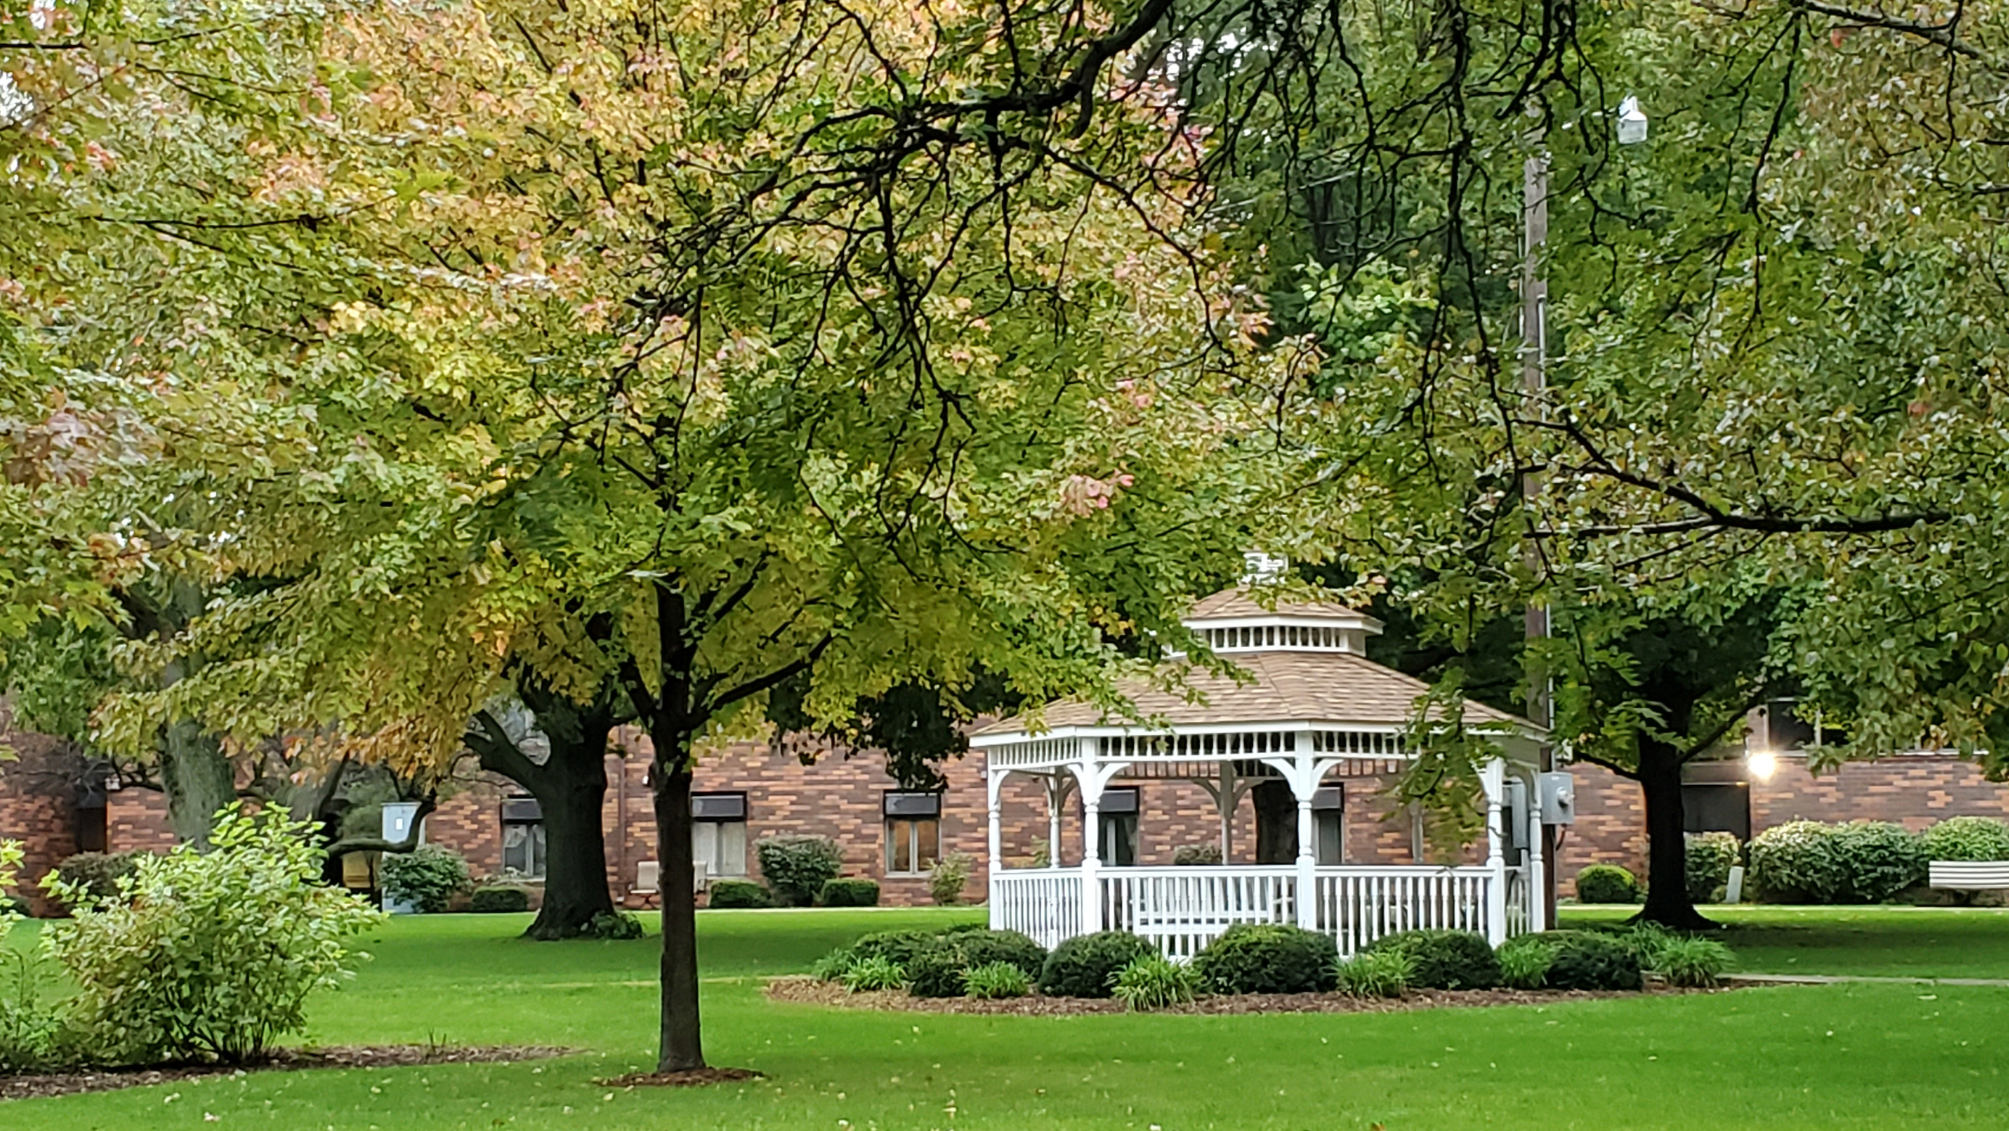 White gazebo located in green grass with trees